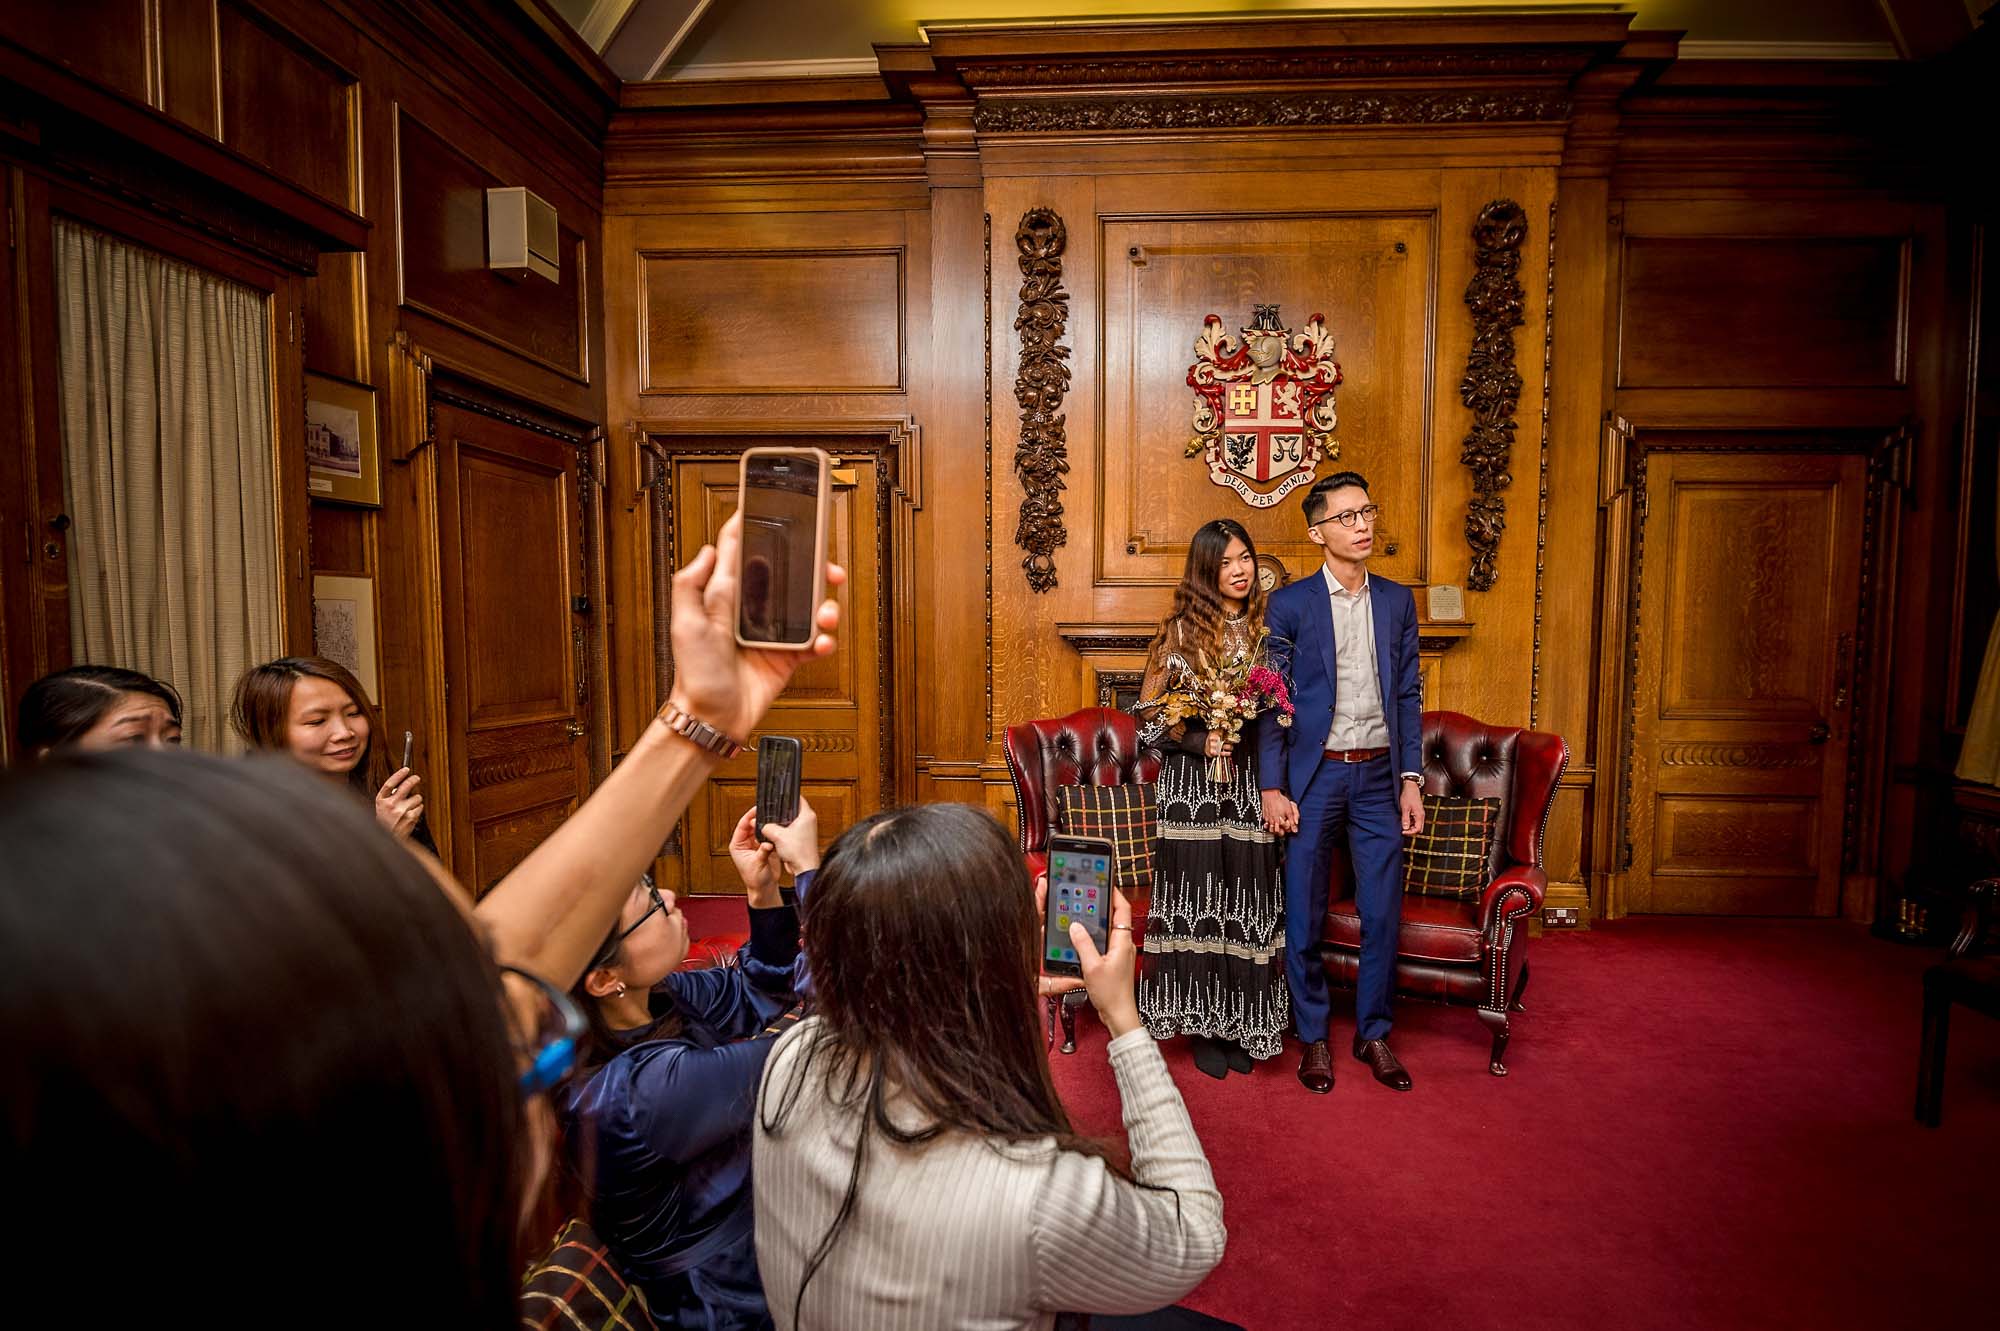 Guests filming couple on mobile phones at wedding ceremony in Islington Town Hall, London